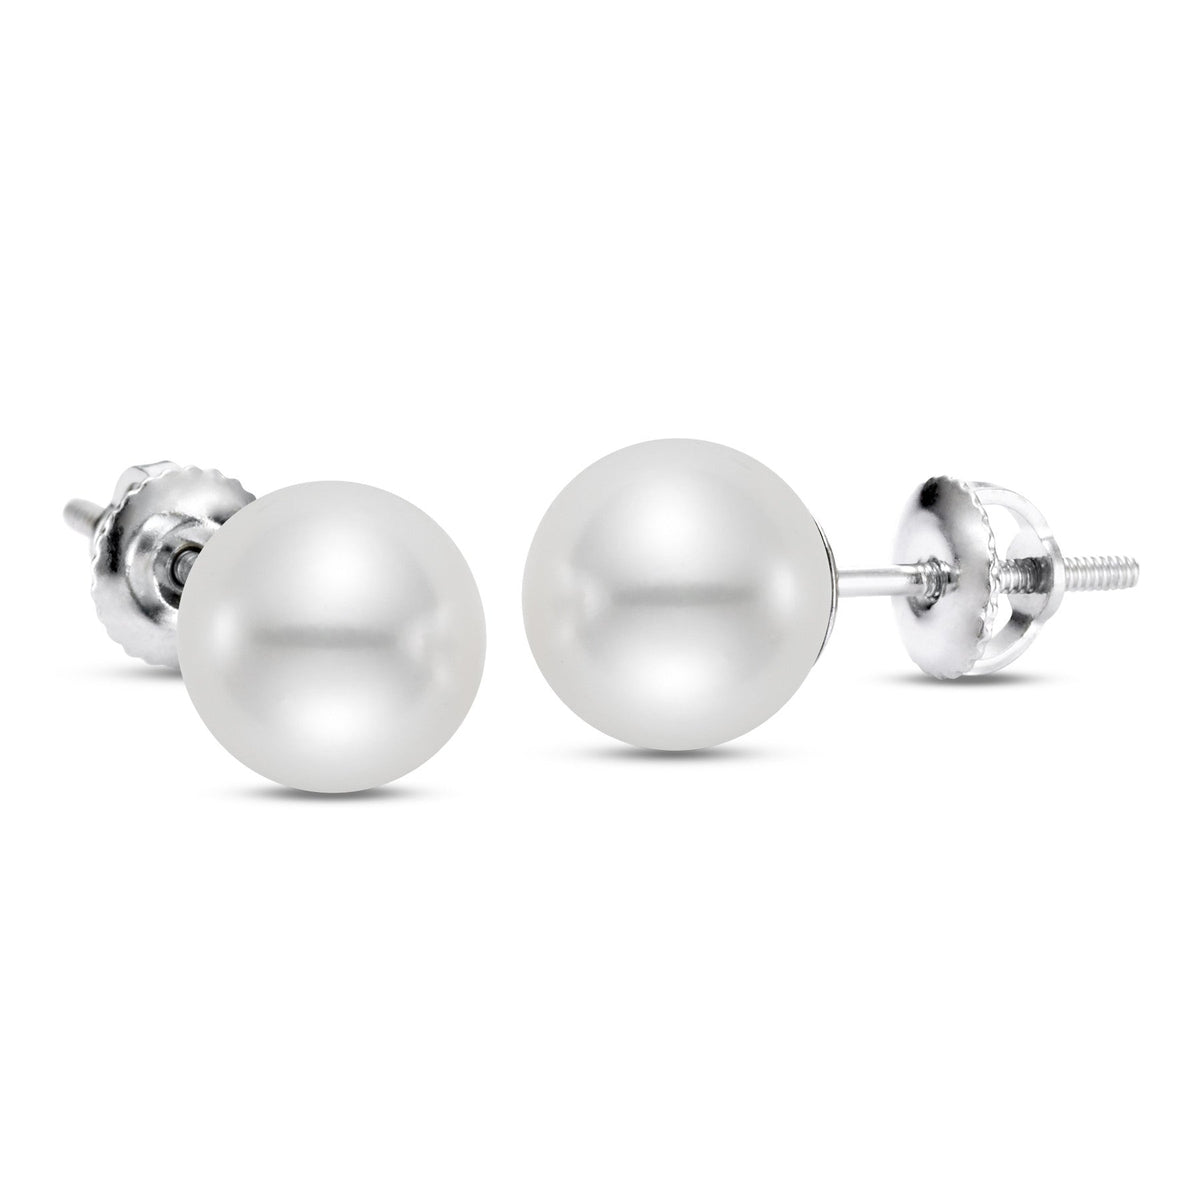 White South Sea Cultured Pearl Stud Earrings in 14K White Gold - Isaac Westman - 1